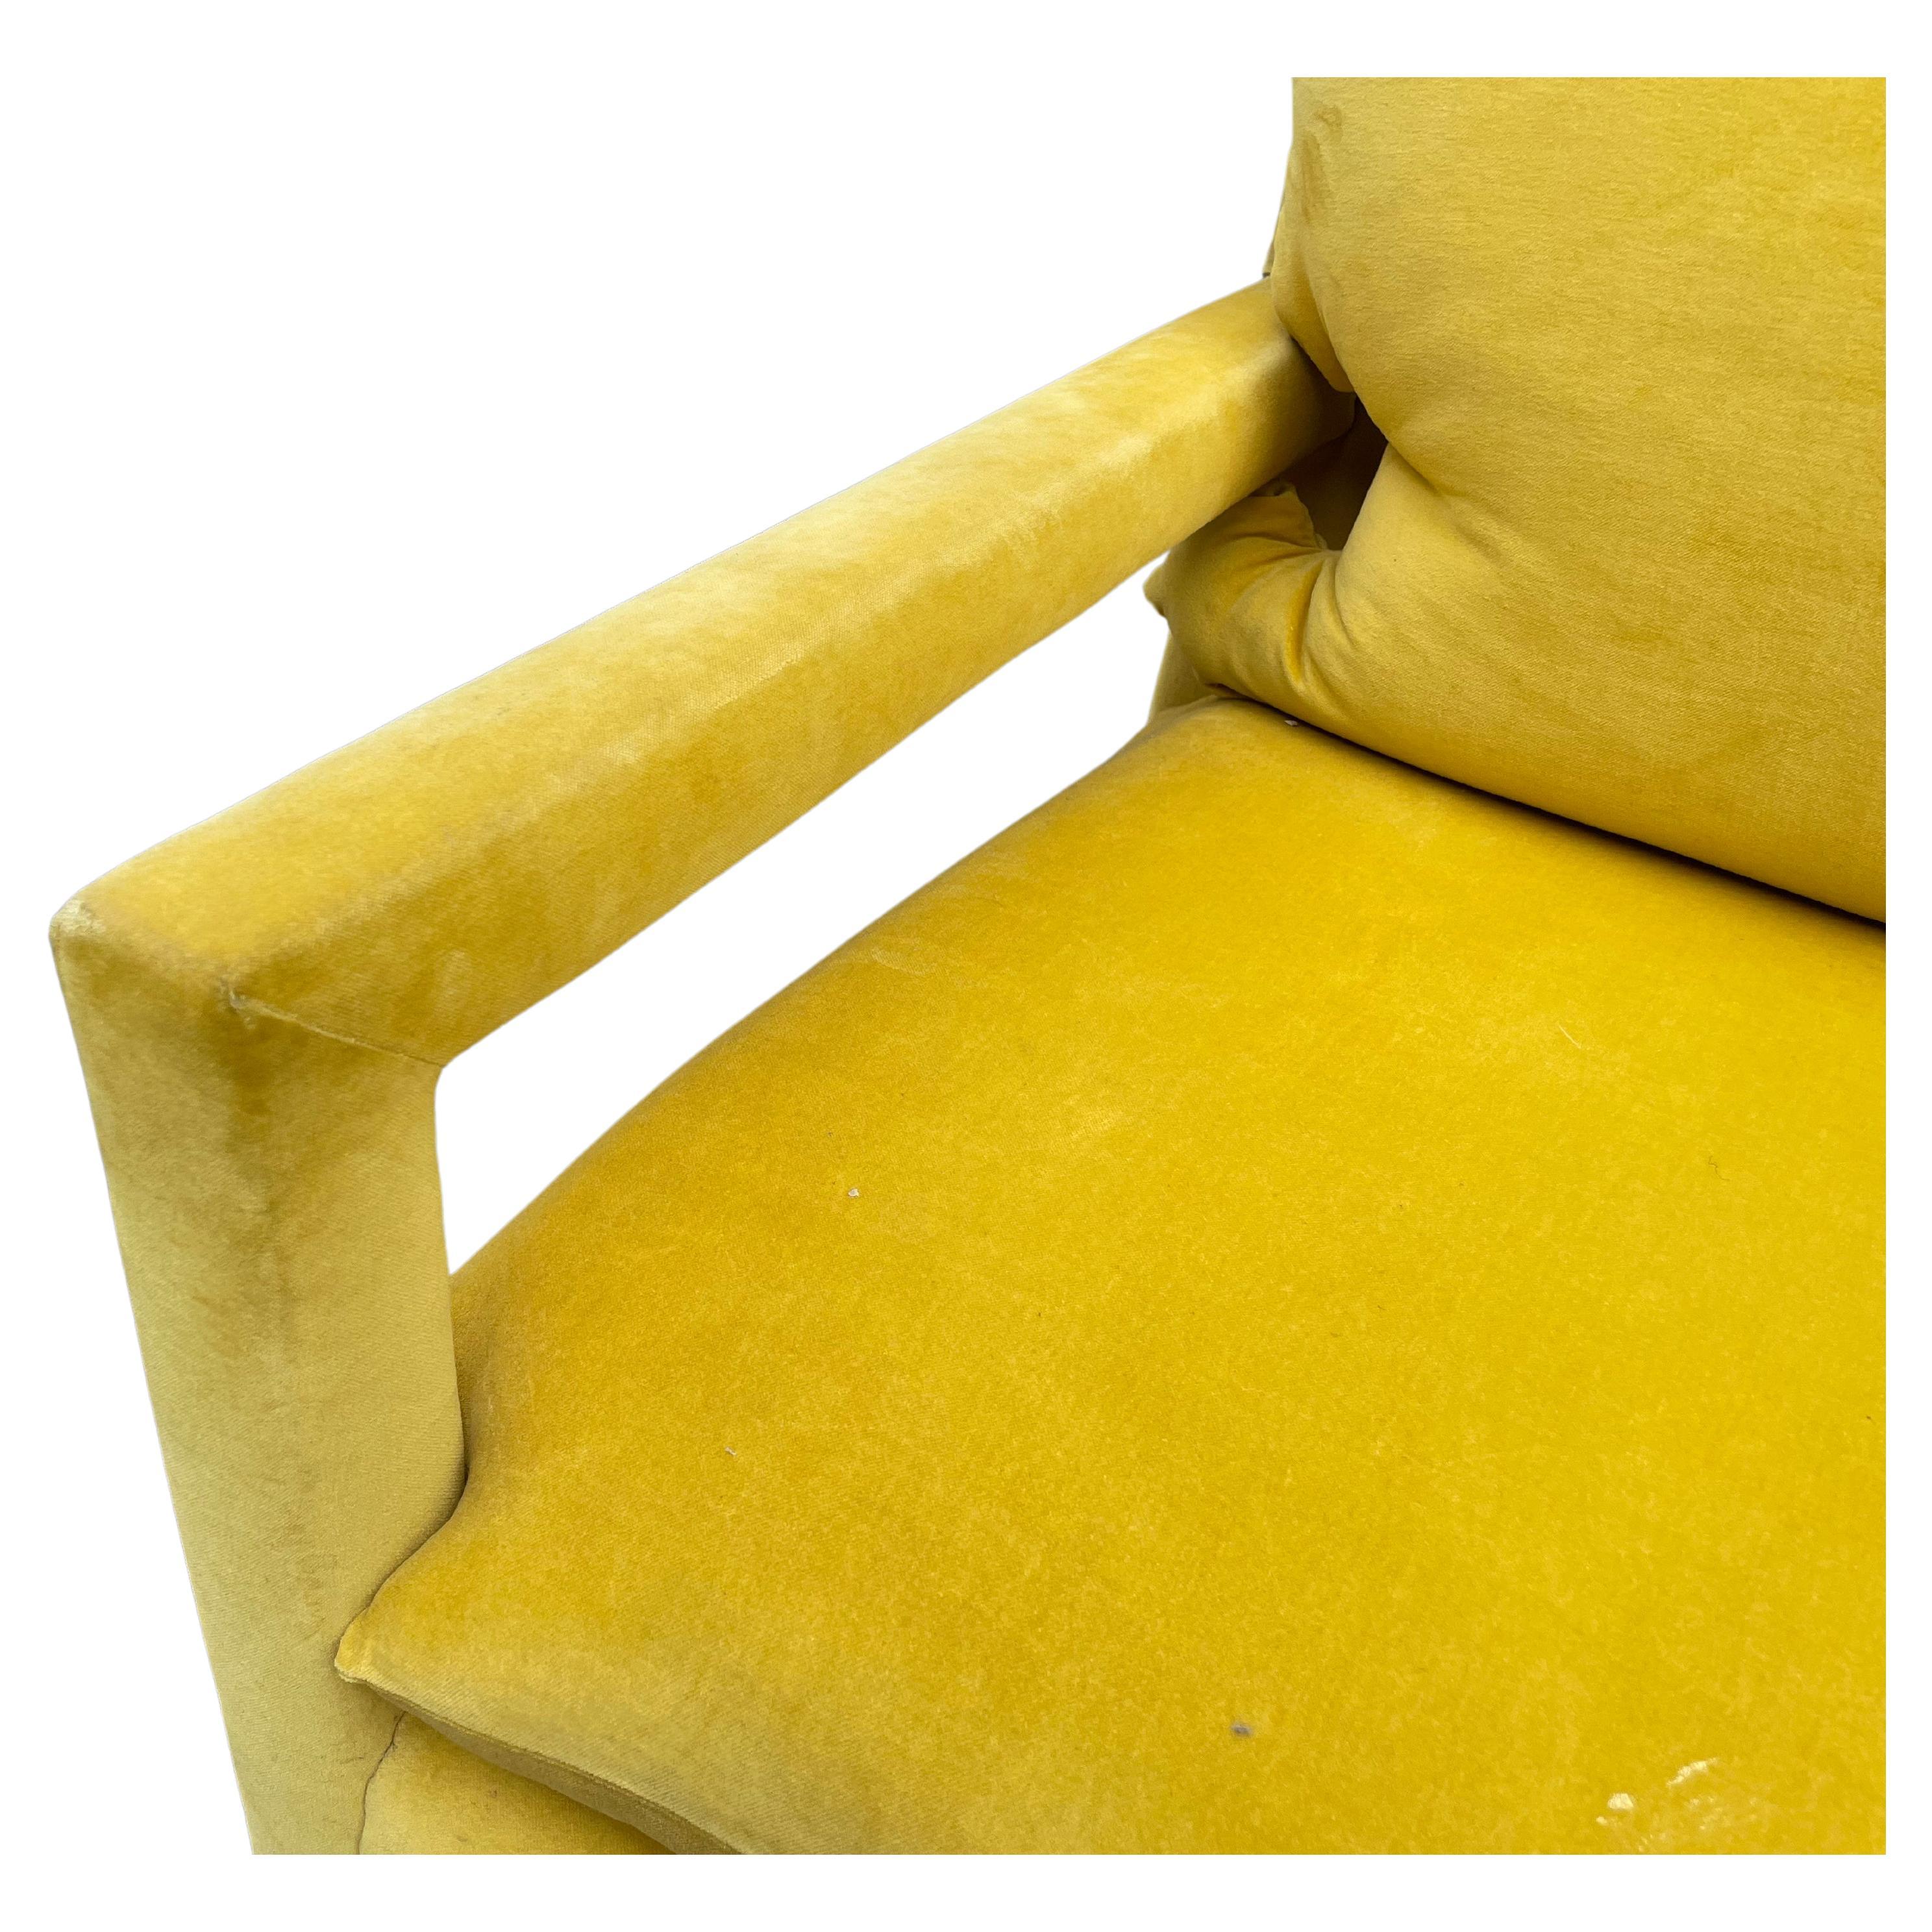 A stunning pair of vintage parson chairs by Milo Baughman fully upholstered in a high quality yellow velvet. Each chair has a removable back and seat cushion. Extremely comfortable.

Very good condition.

Price is for the pair.

DIMENSIONS: 30